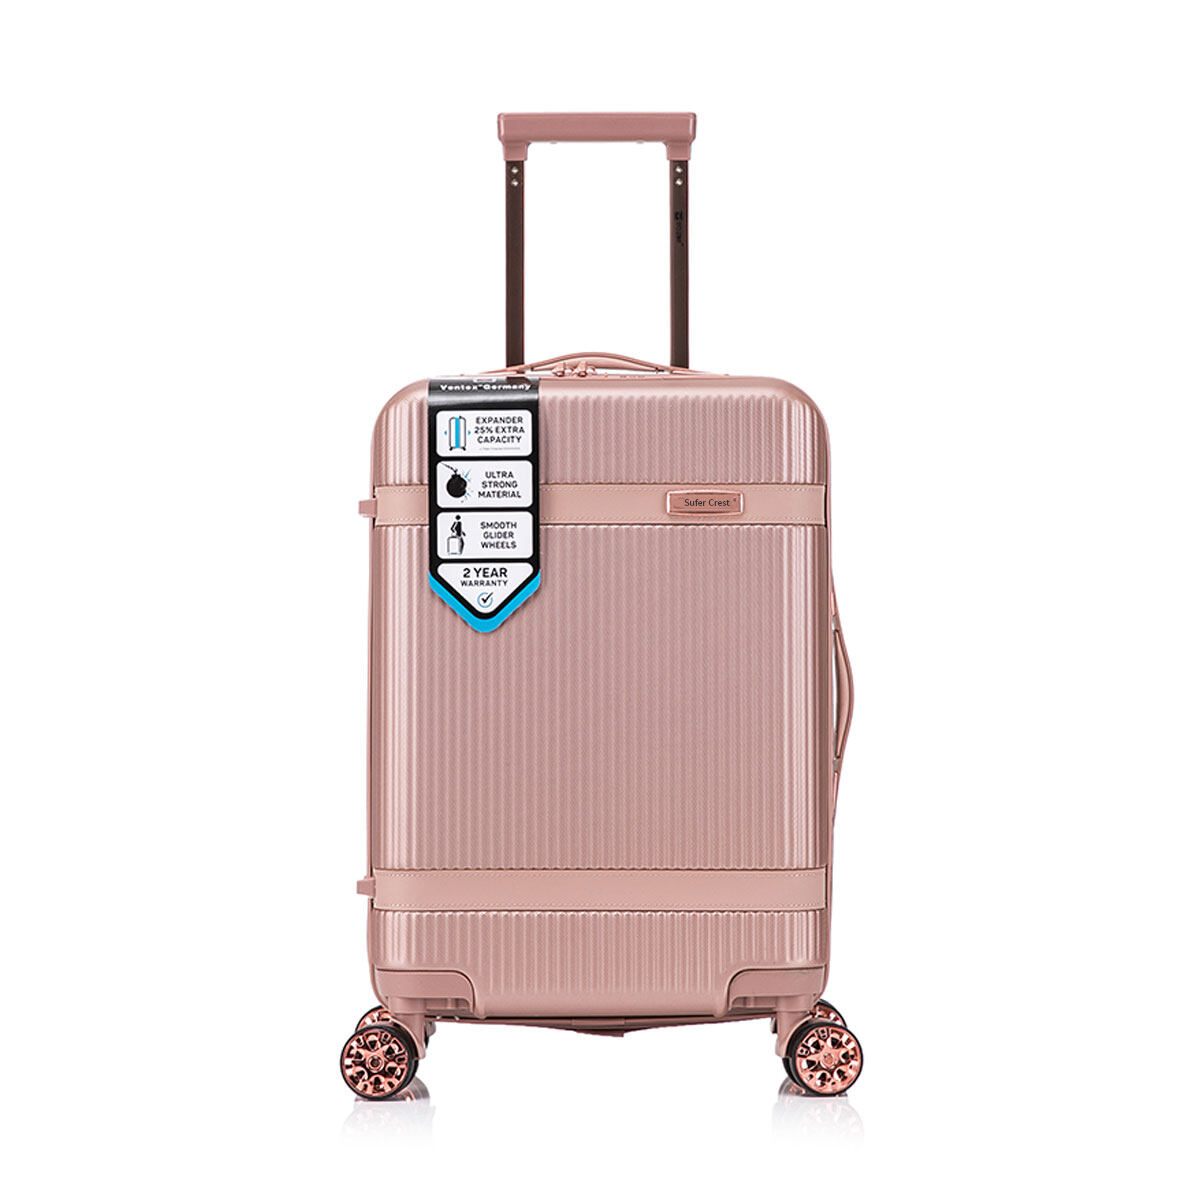 2 Wheeled Luggage | Upright Suitcases | Luggage with 2 Wheels at Luggage  Superstore